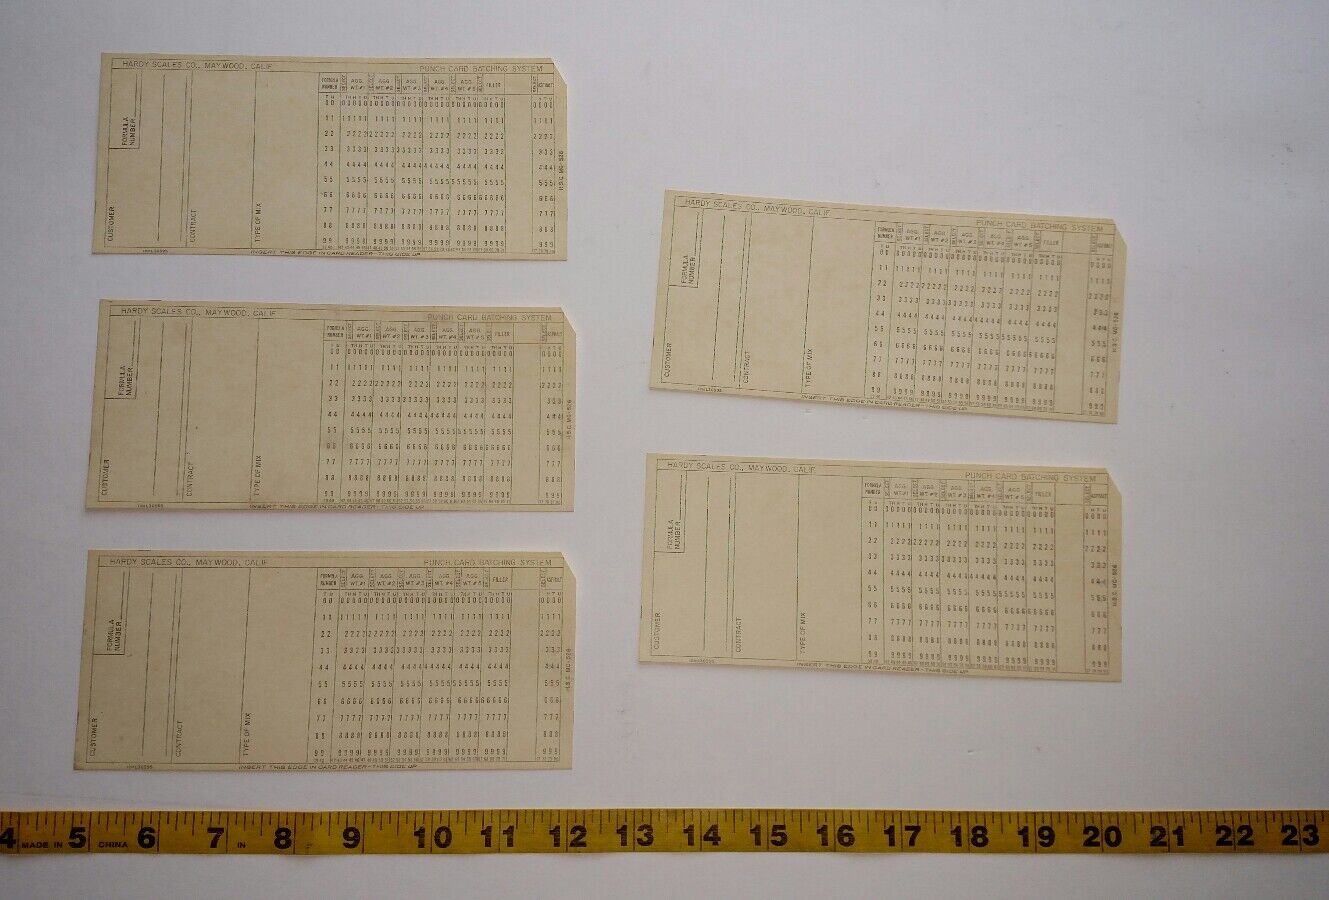 Lot of 10 Vintage Hardy Scale Co Punch Card for Batching System (Wright 2600) T